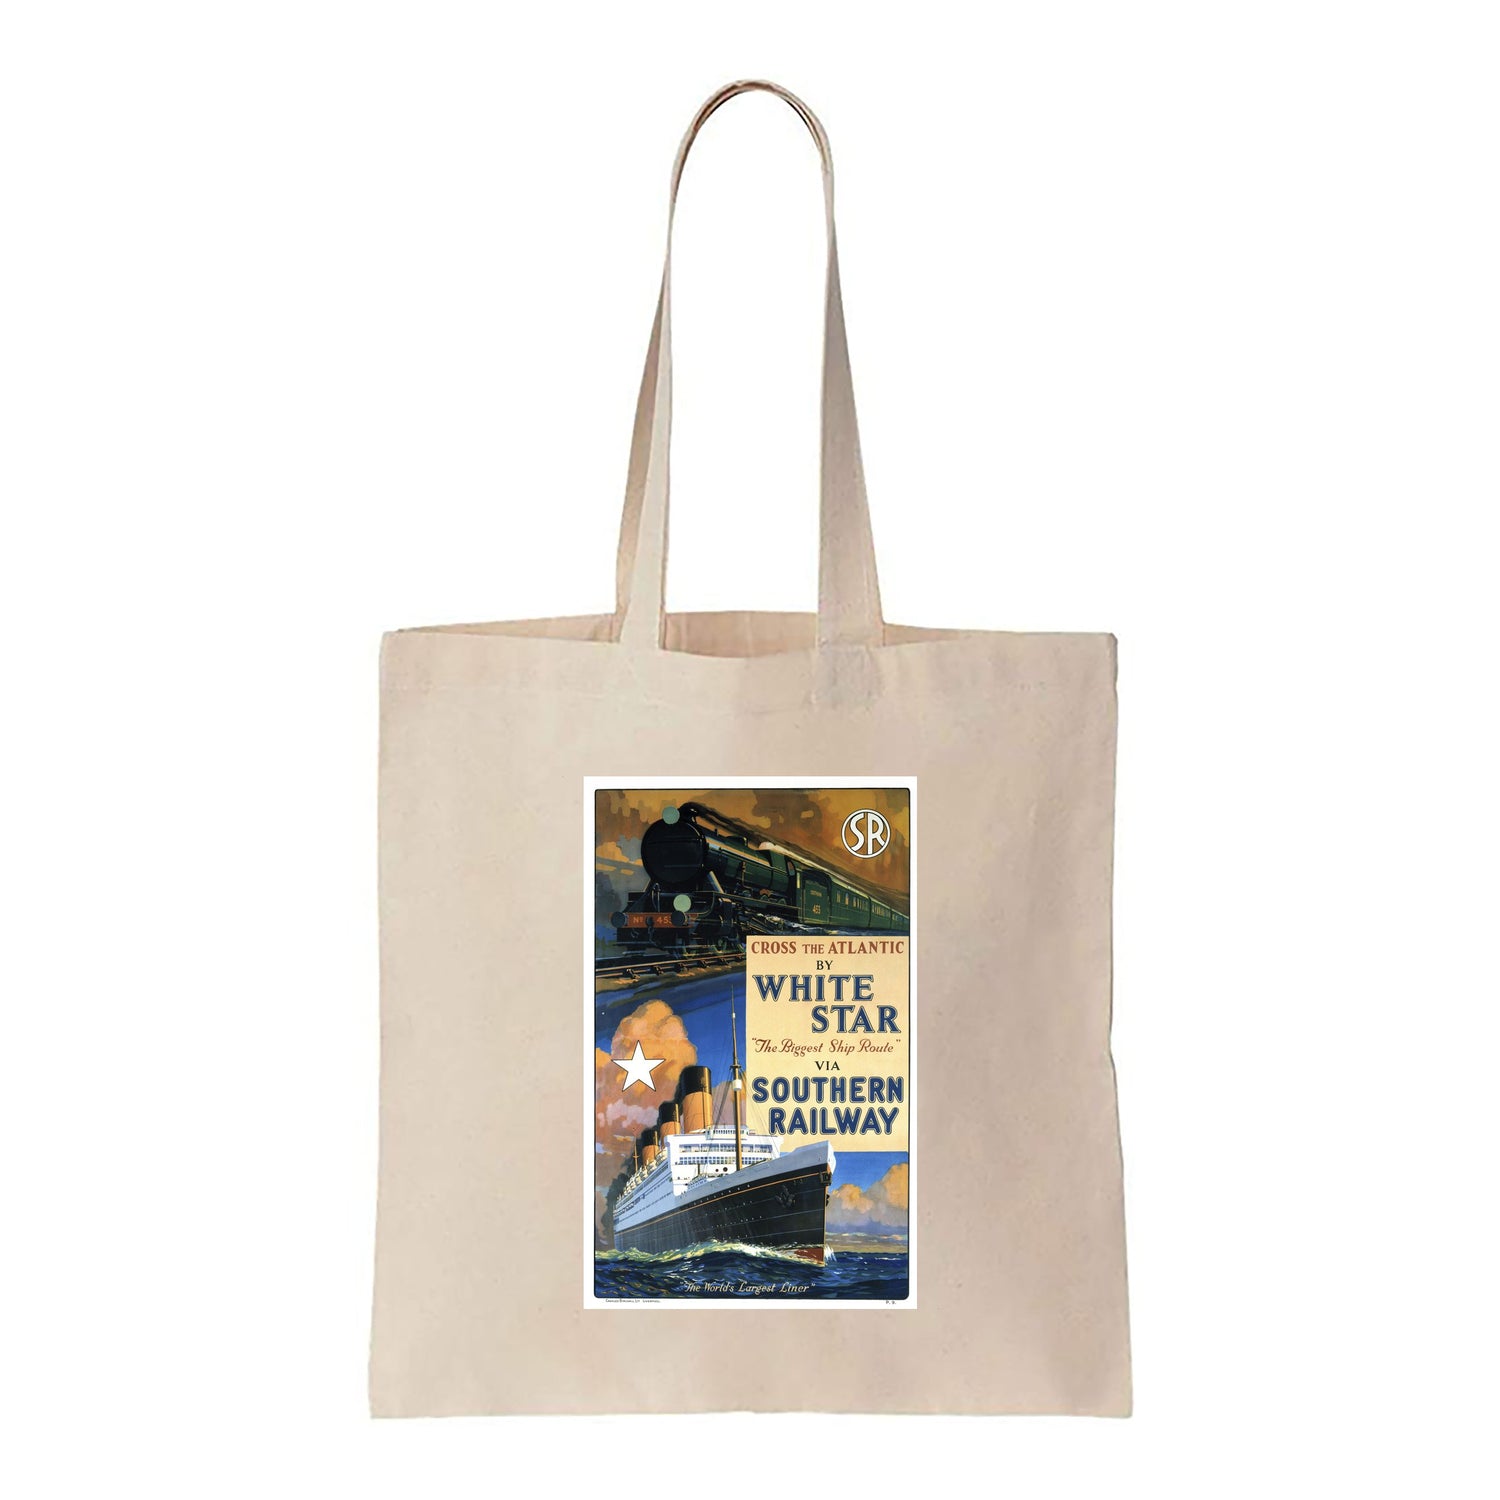 Cross the Atlantic by White Star - Southern Railway - Canvas Tote Bag